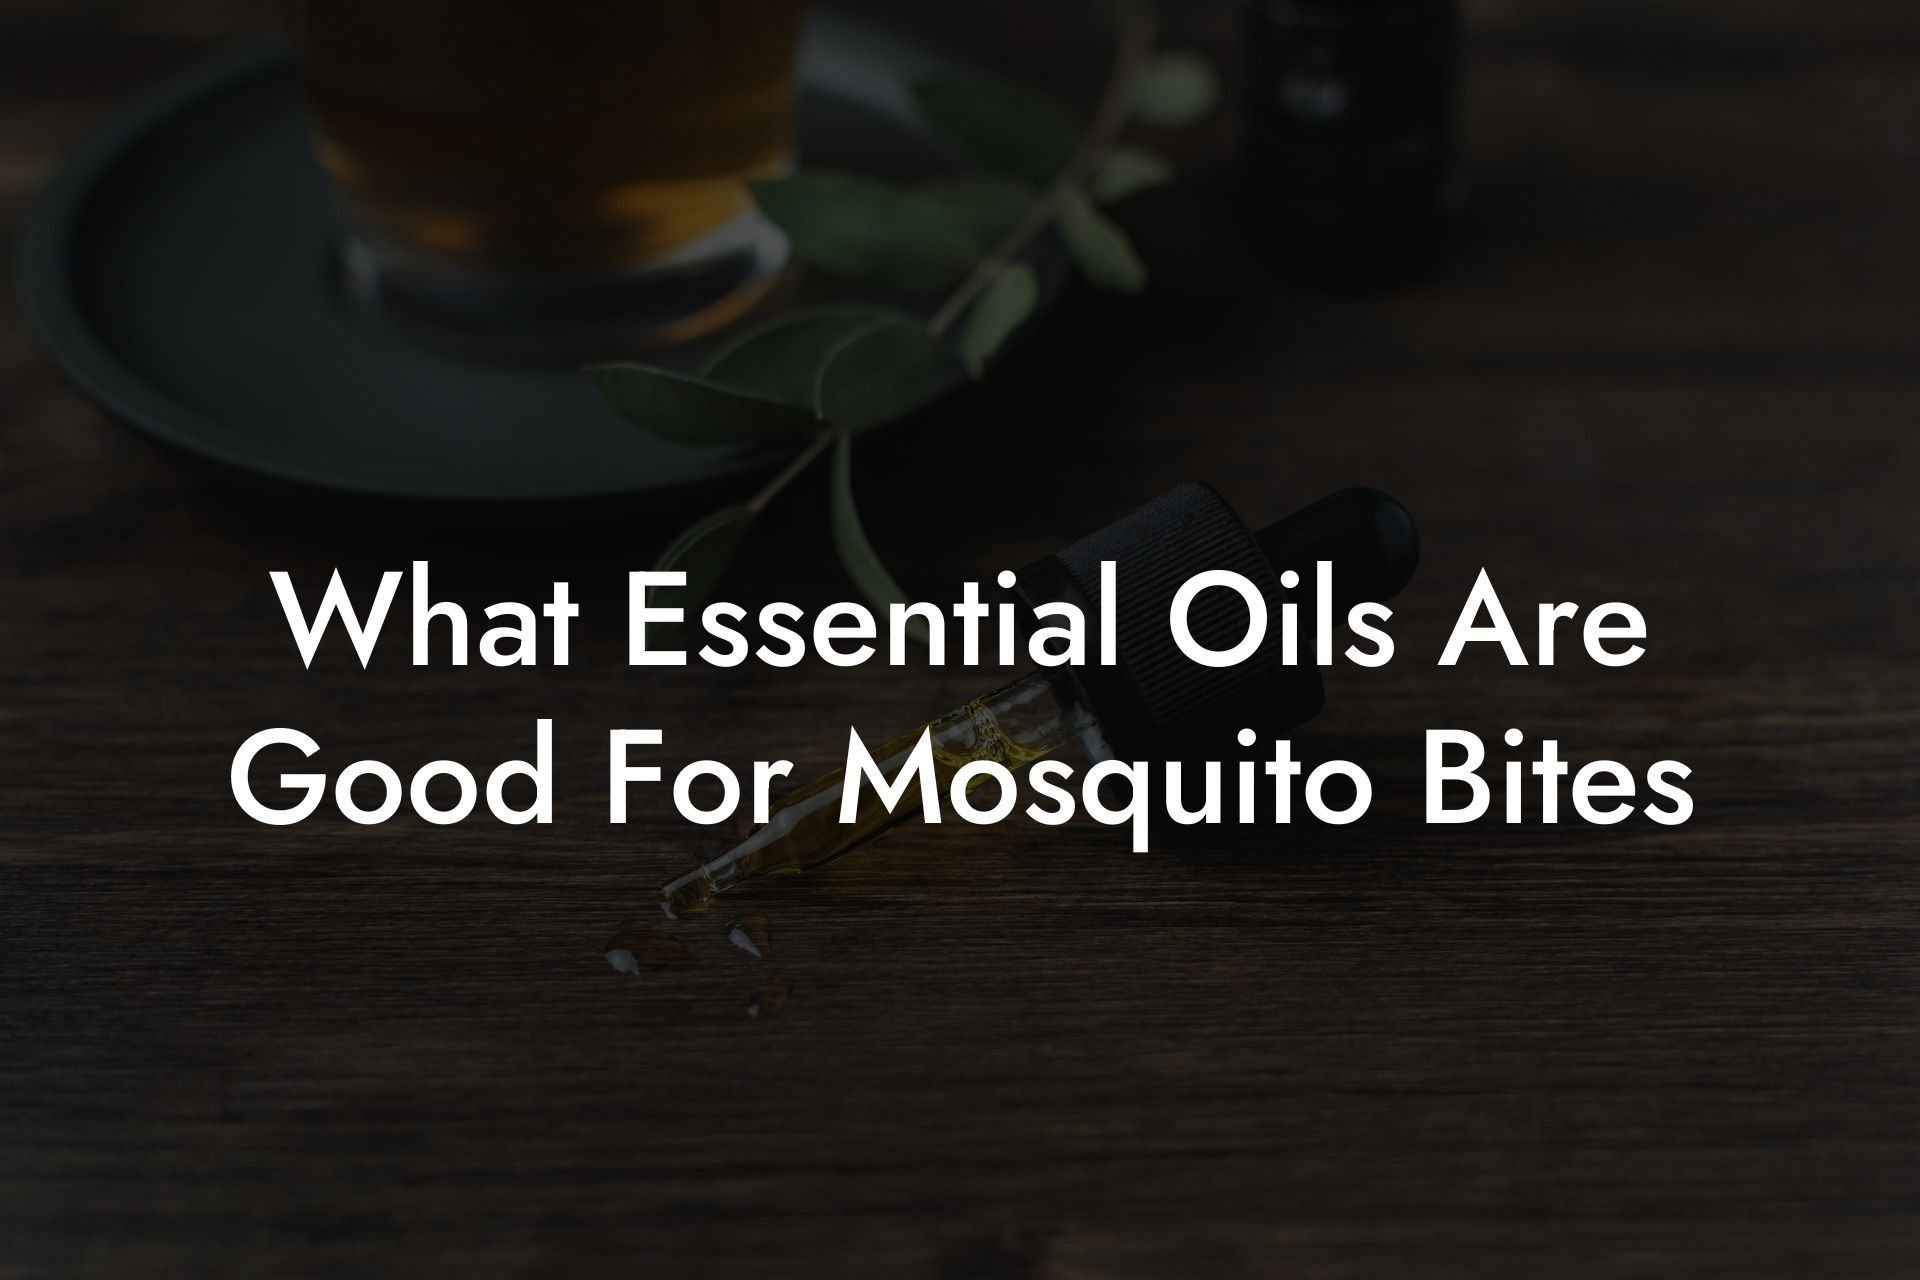 What Essential Oils Are Good For Mosquito Bites